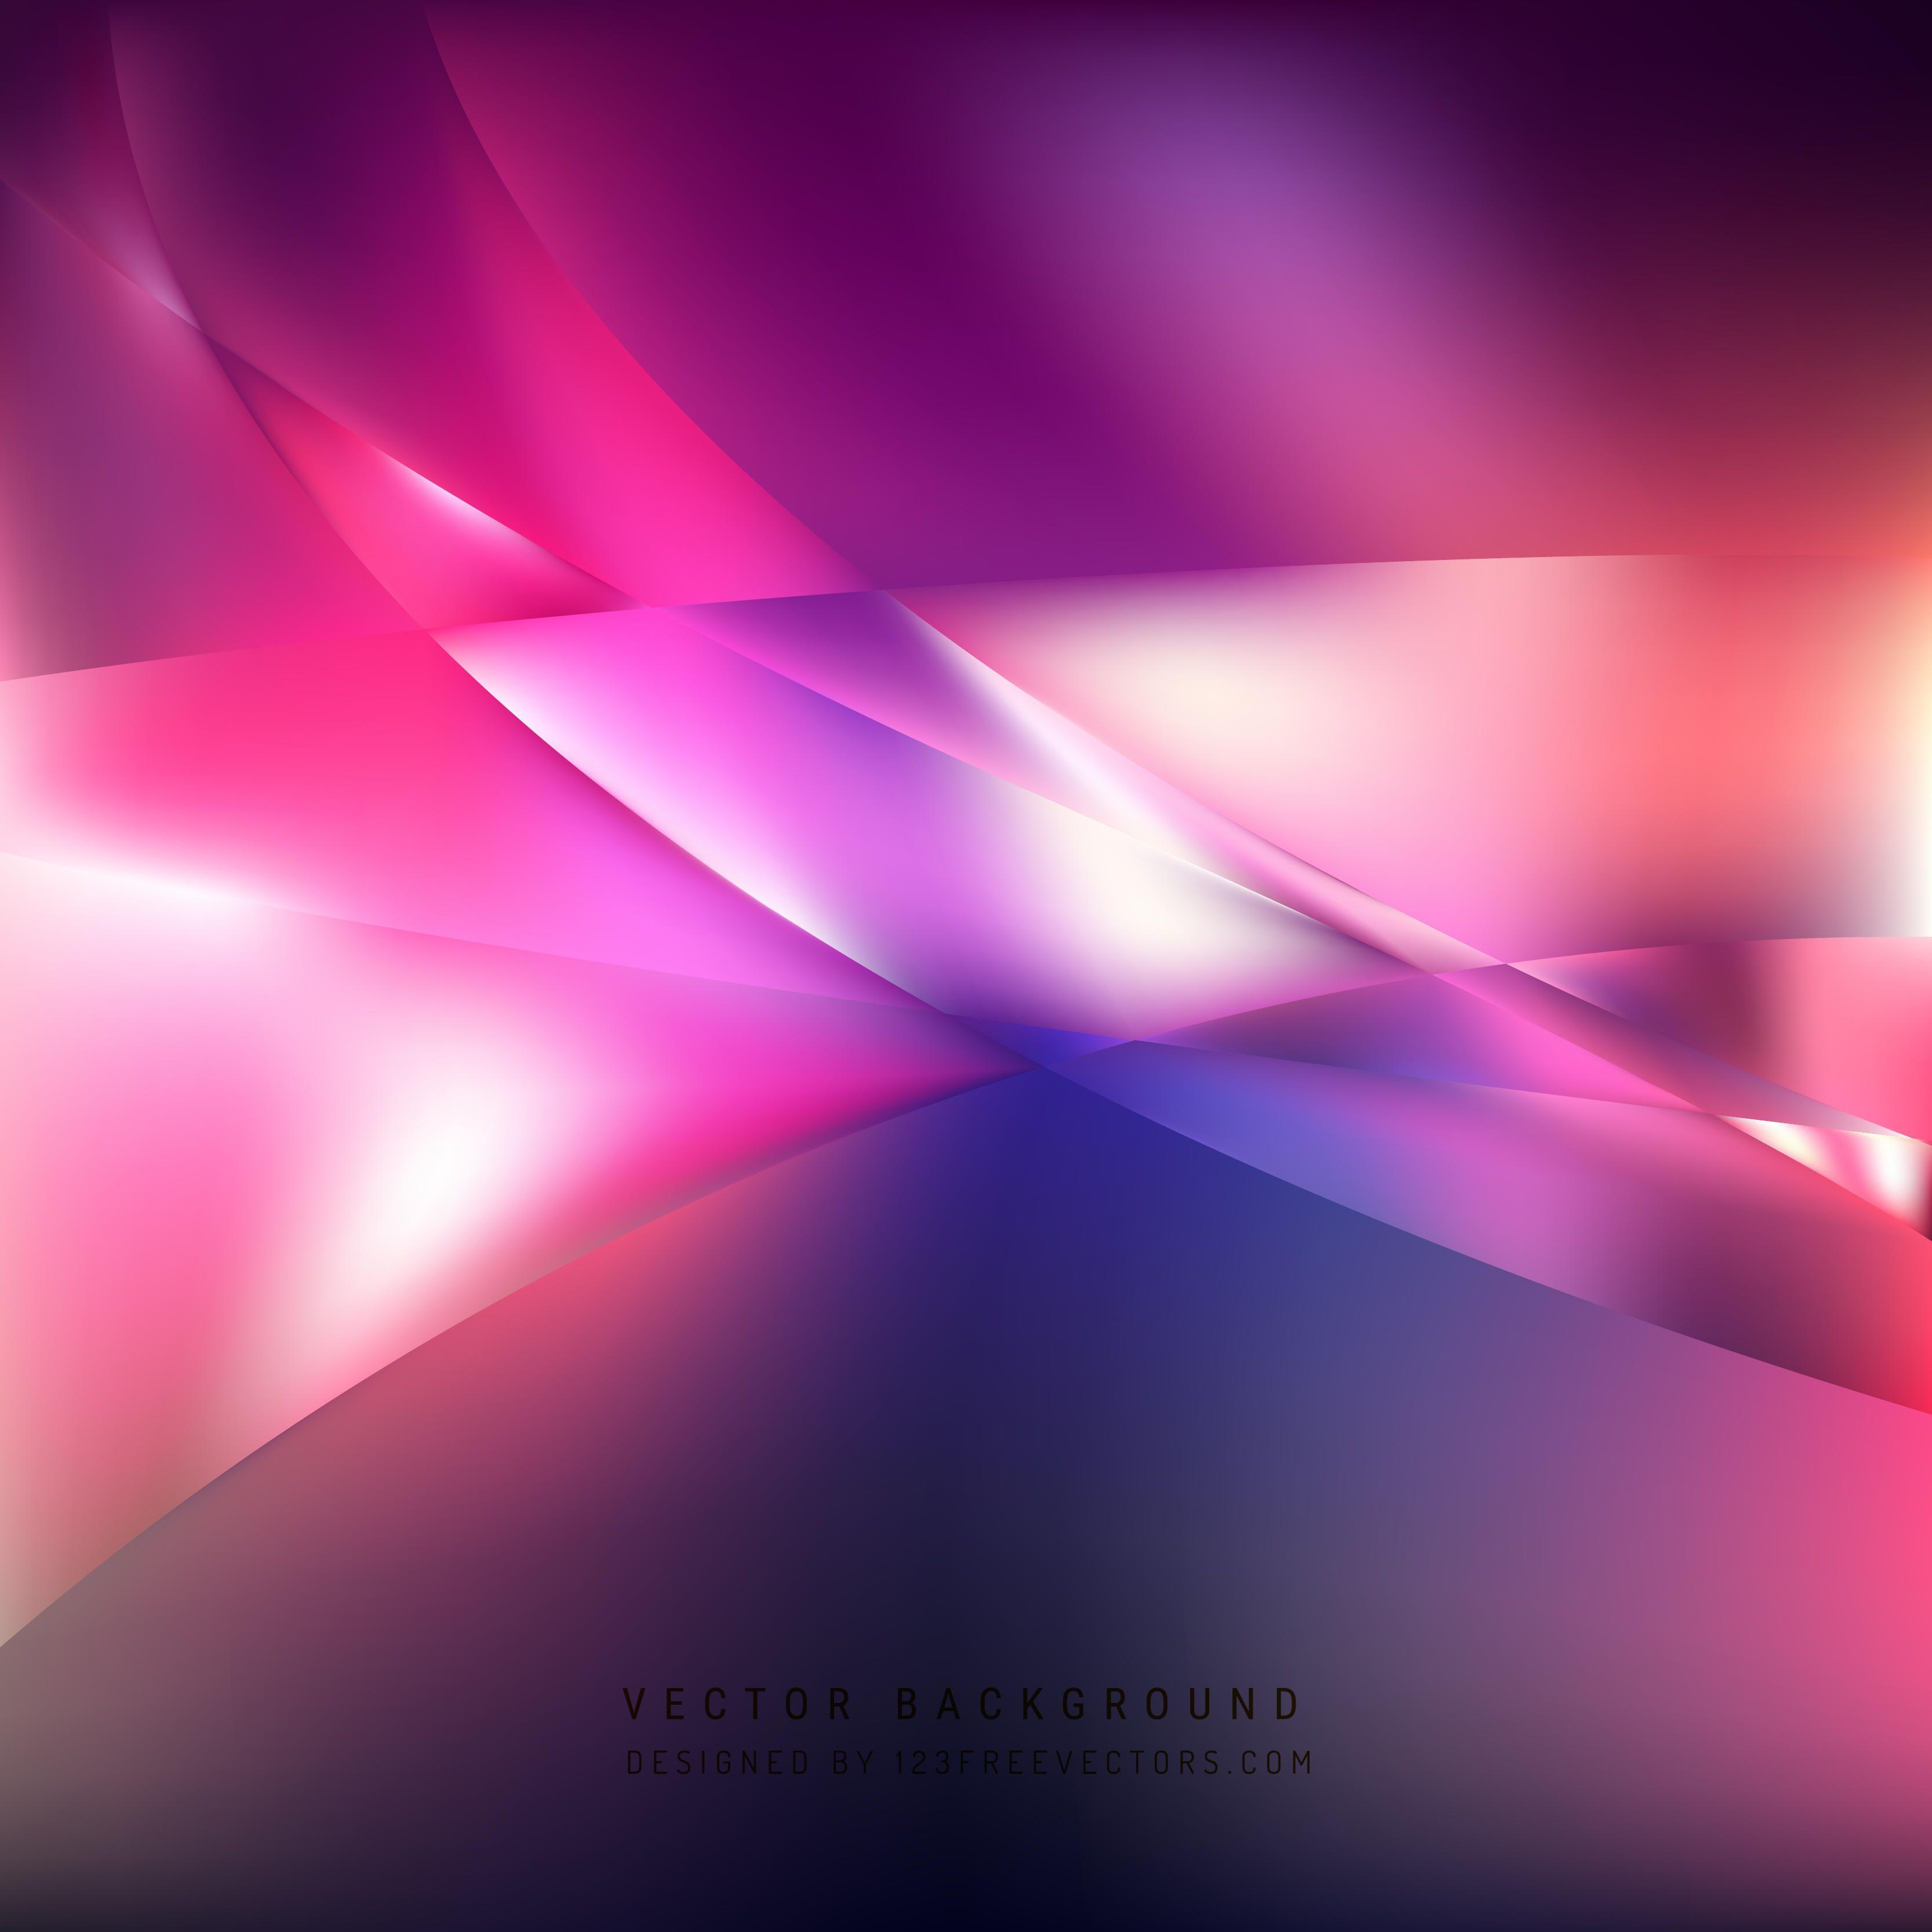 Purple Pink Abstract BackgroundFreevectors